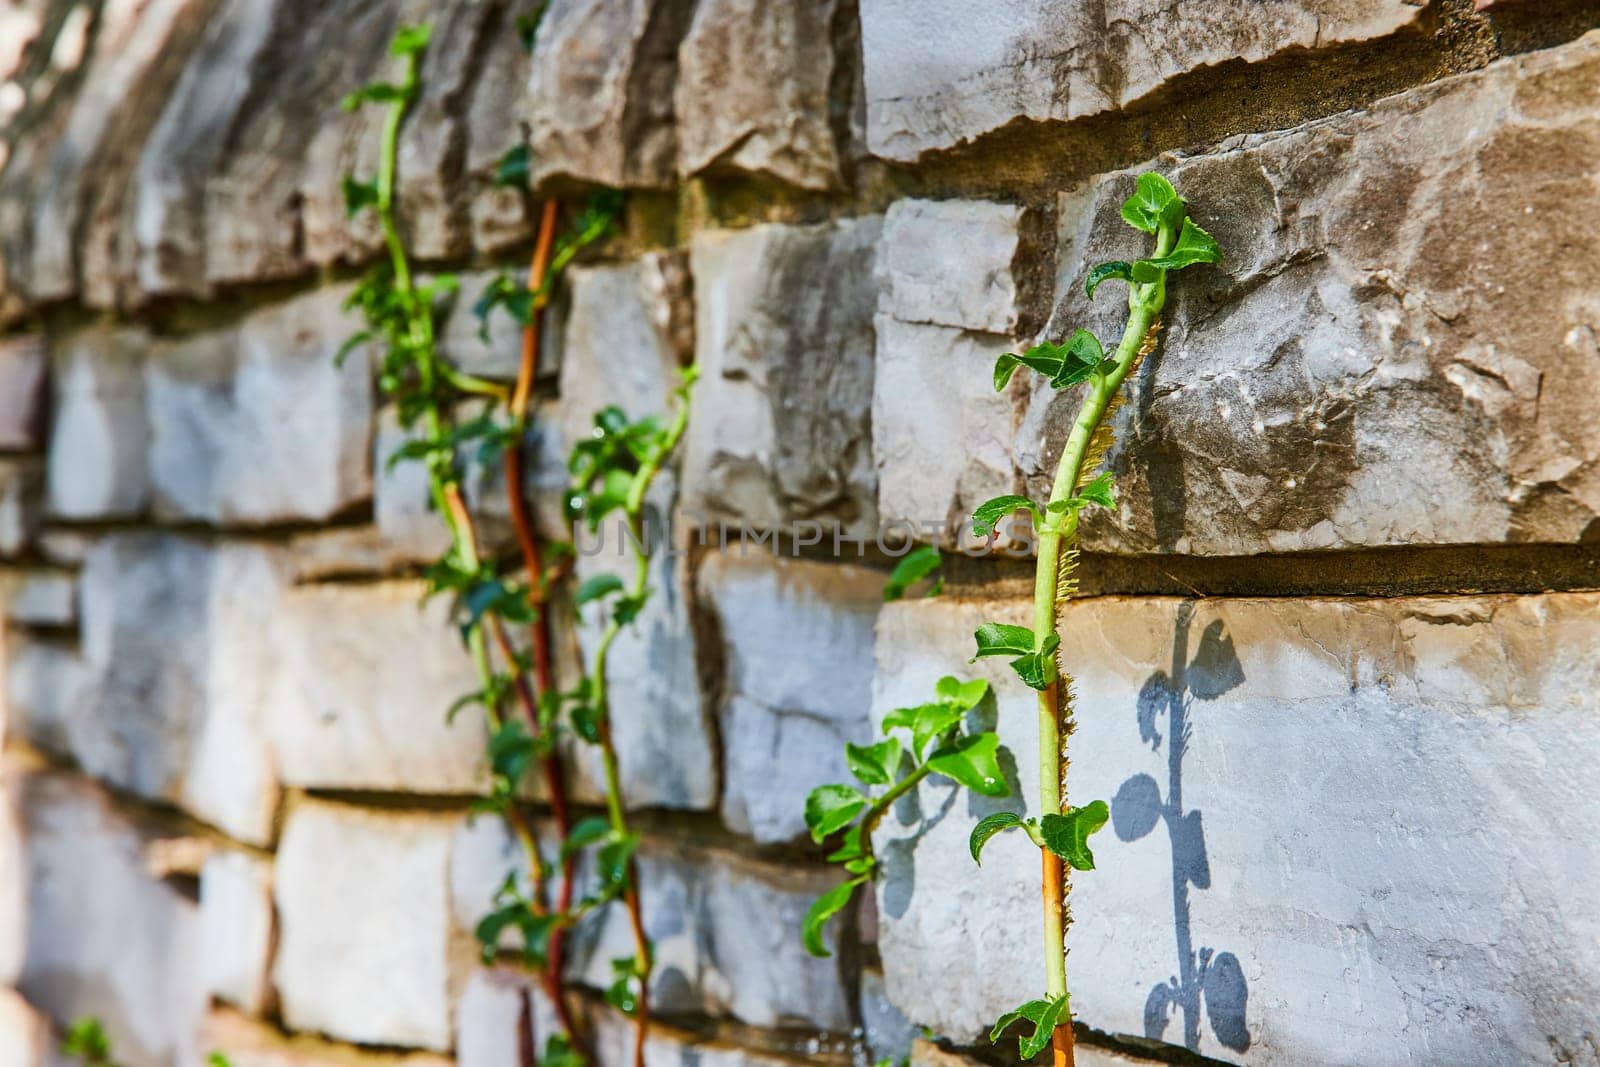 Resilient vine climbing a textured stone wall in Elkhart's Botanic Gardens, Indiana, symbolizing growth and natural beauty in urban spaces.